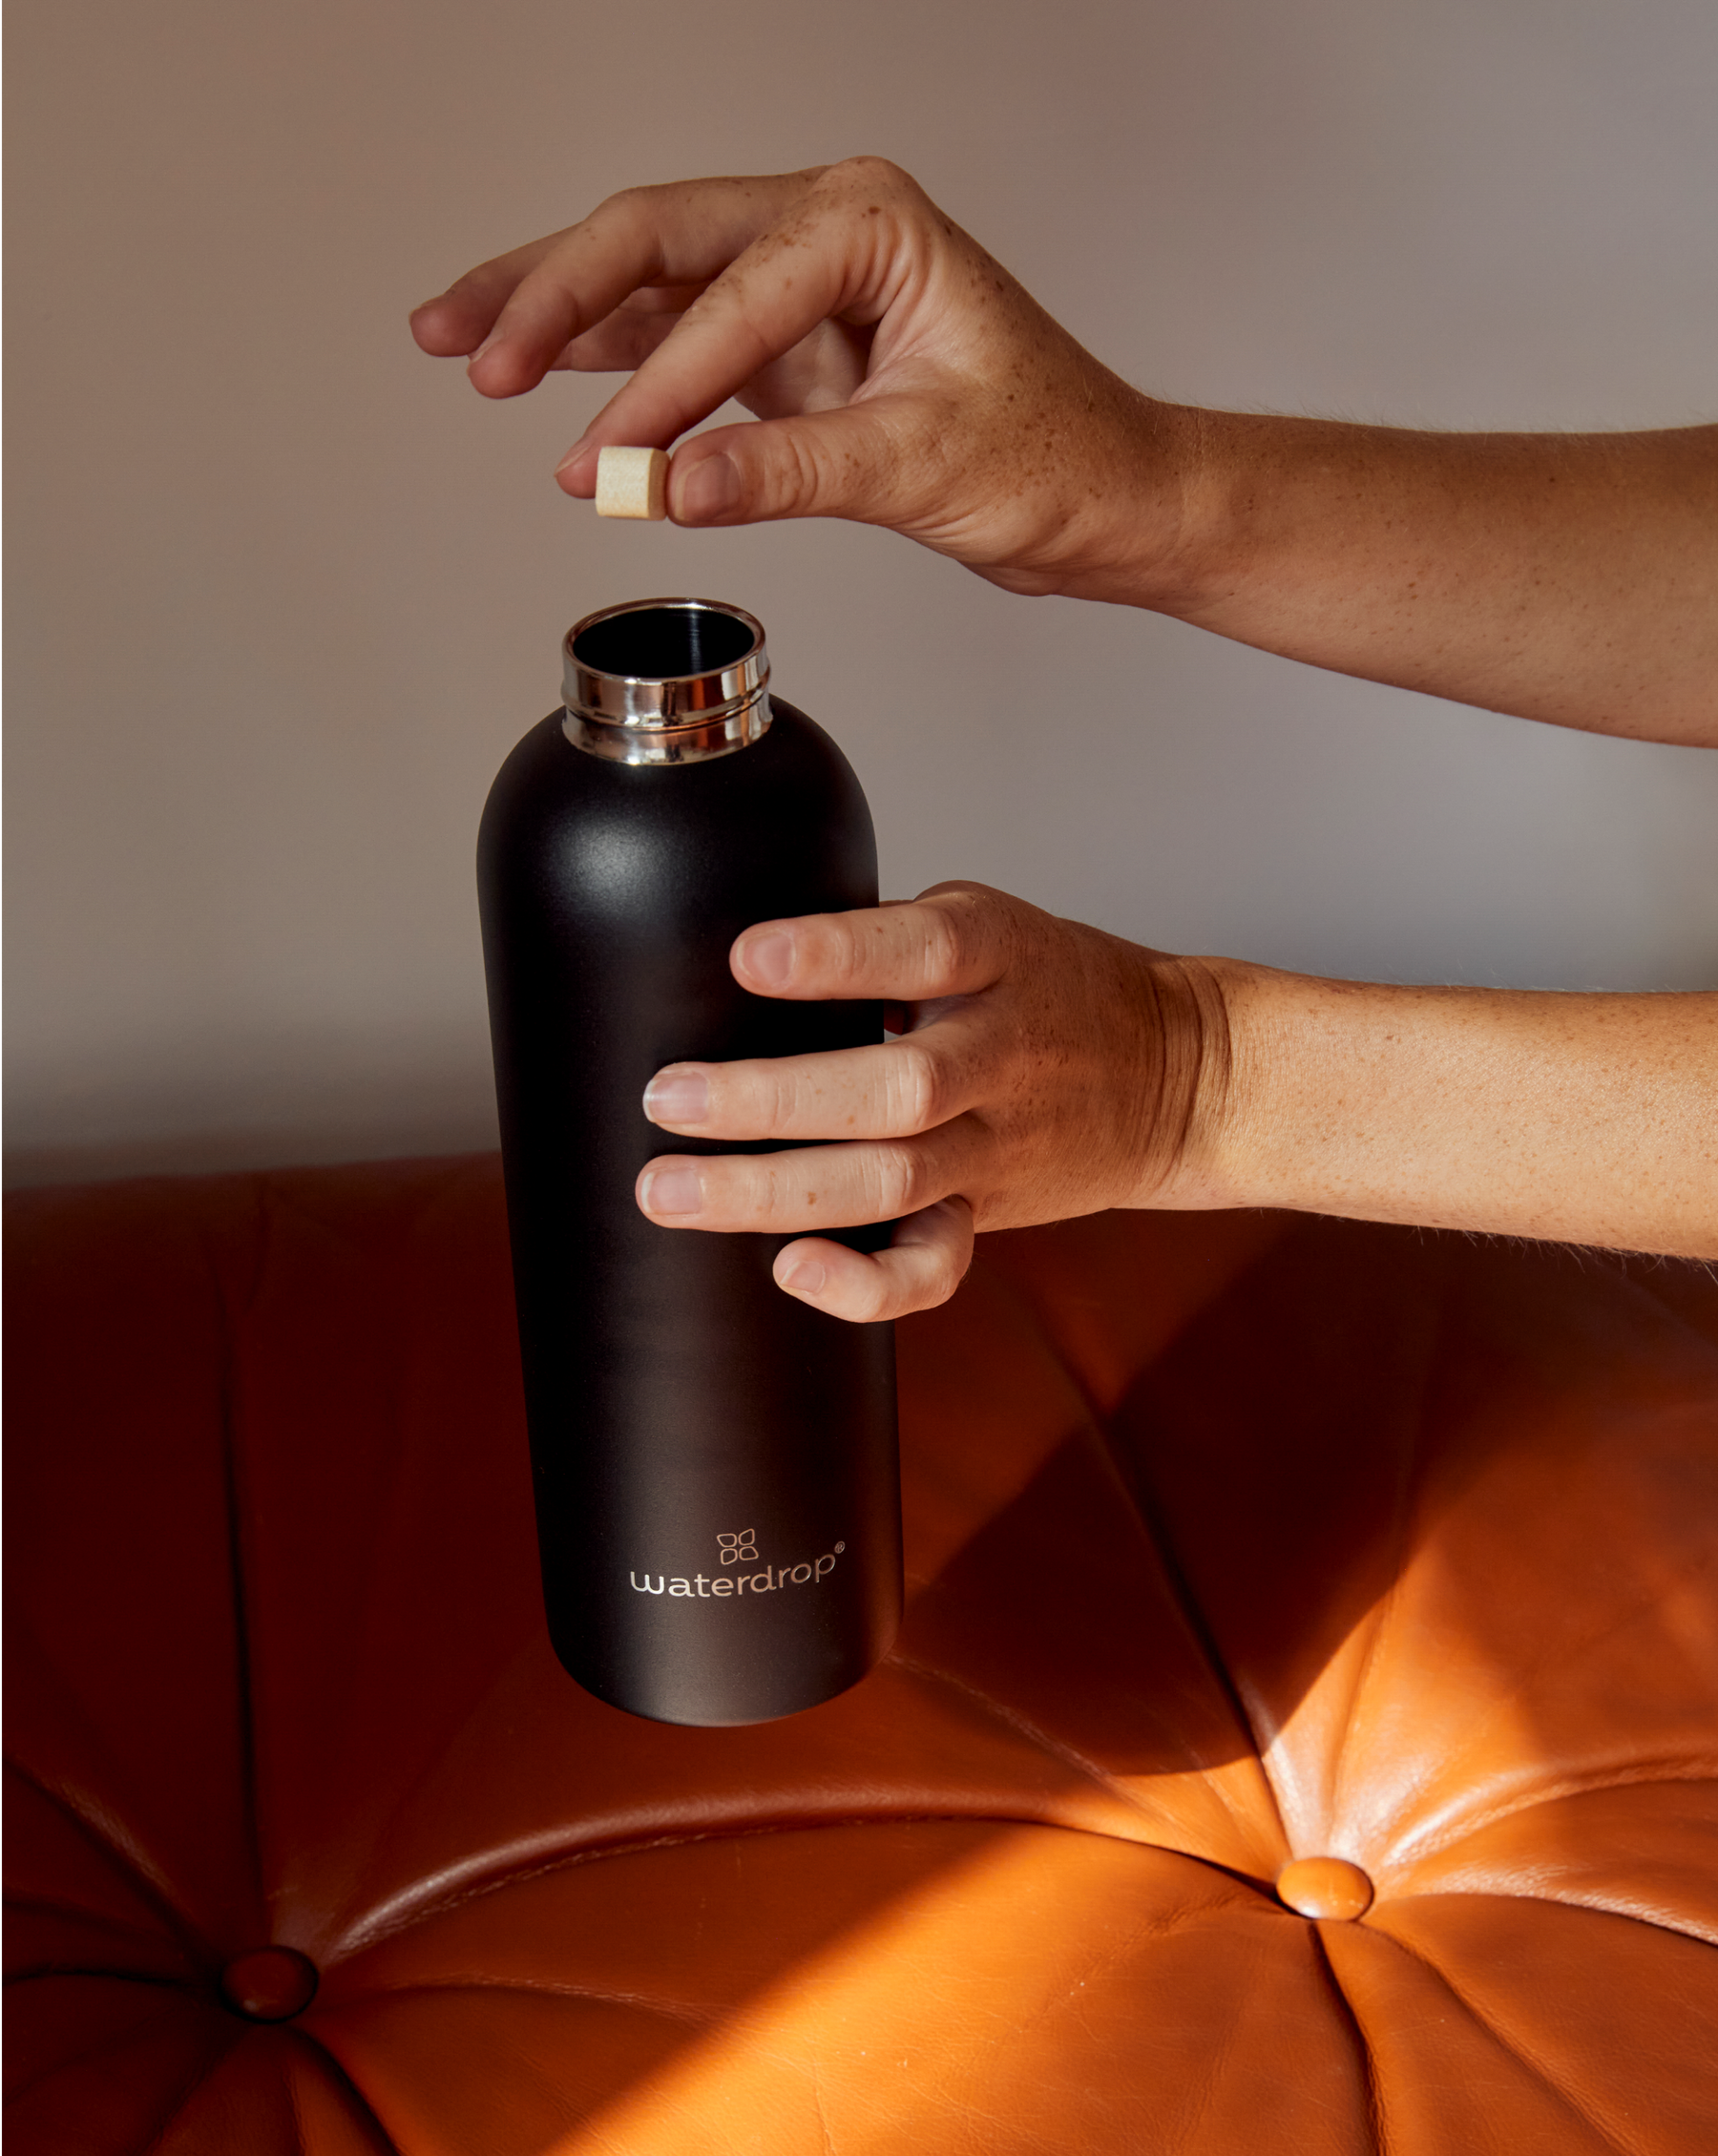 Thermos Flask Water Bottle Black